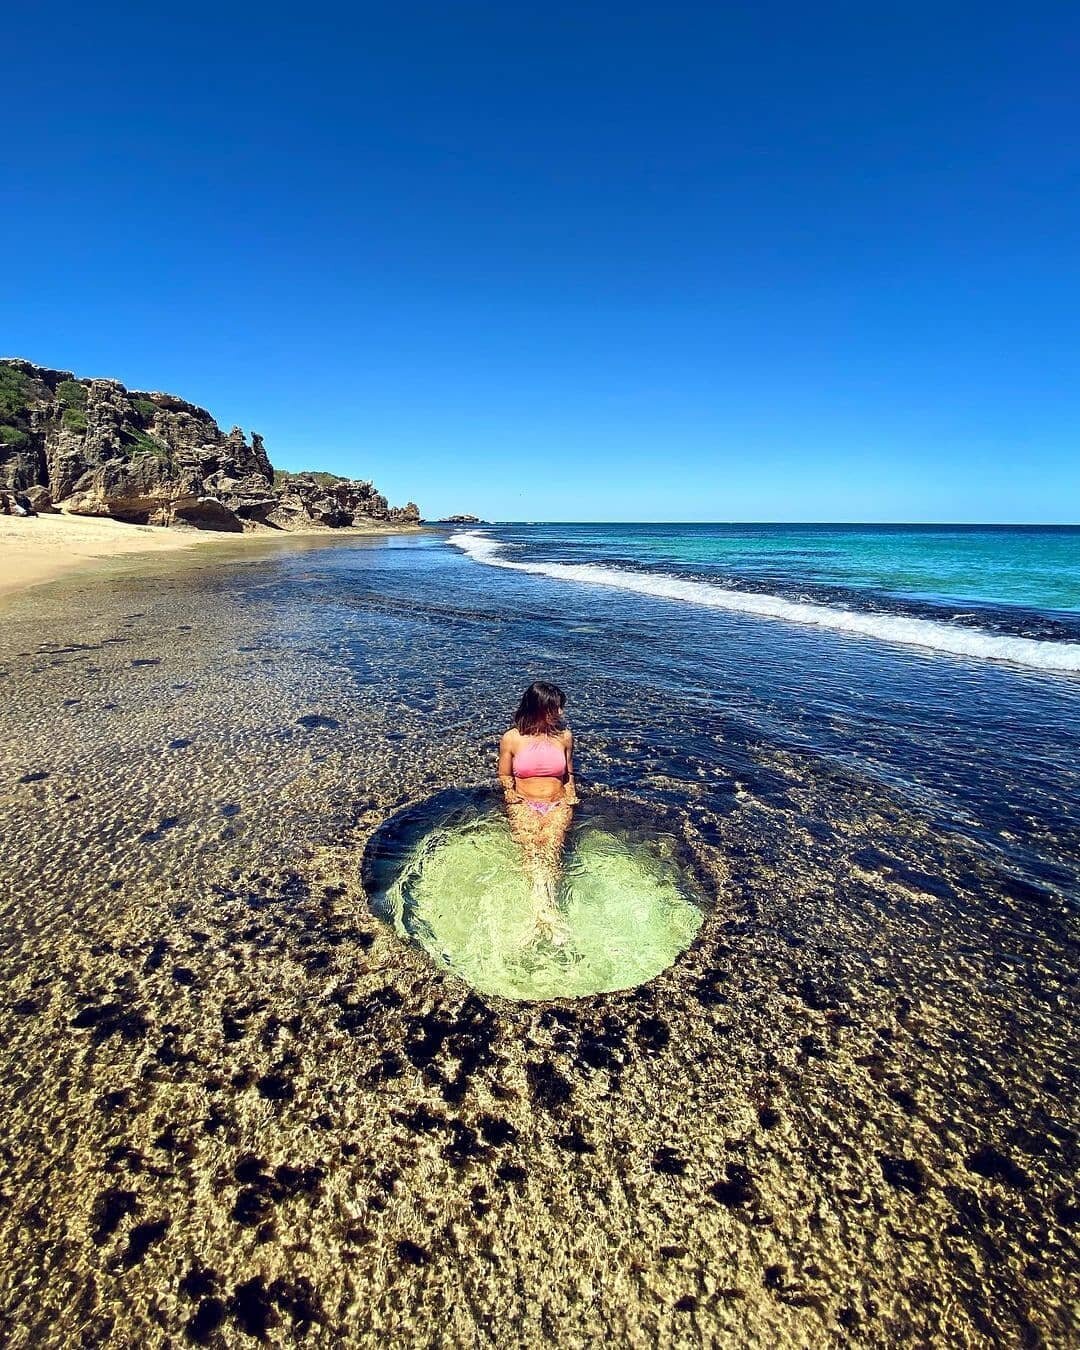 Some days are just pure weather perfection for Penguin Island... Today is one of those days!
@dany_perth is making the most of this spectacular Friday amongst the mermaid pools at the back of this spectacular island! Come join us for a Fri-YAY like n